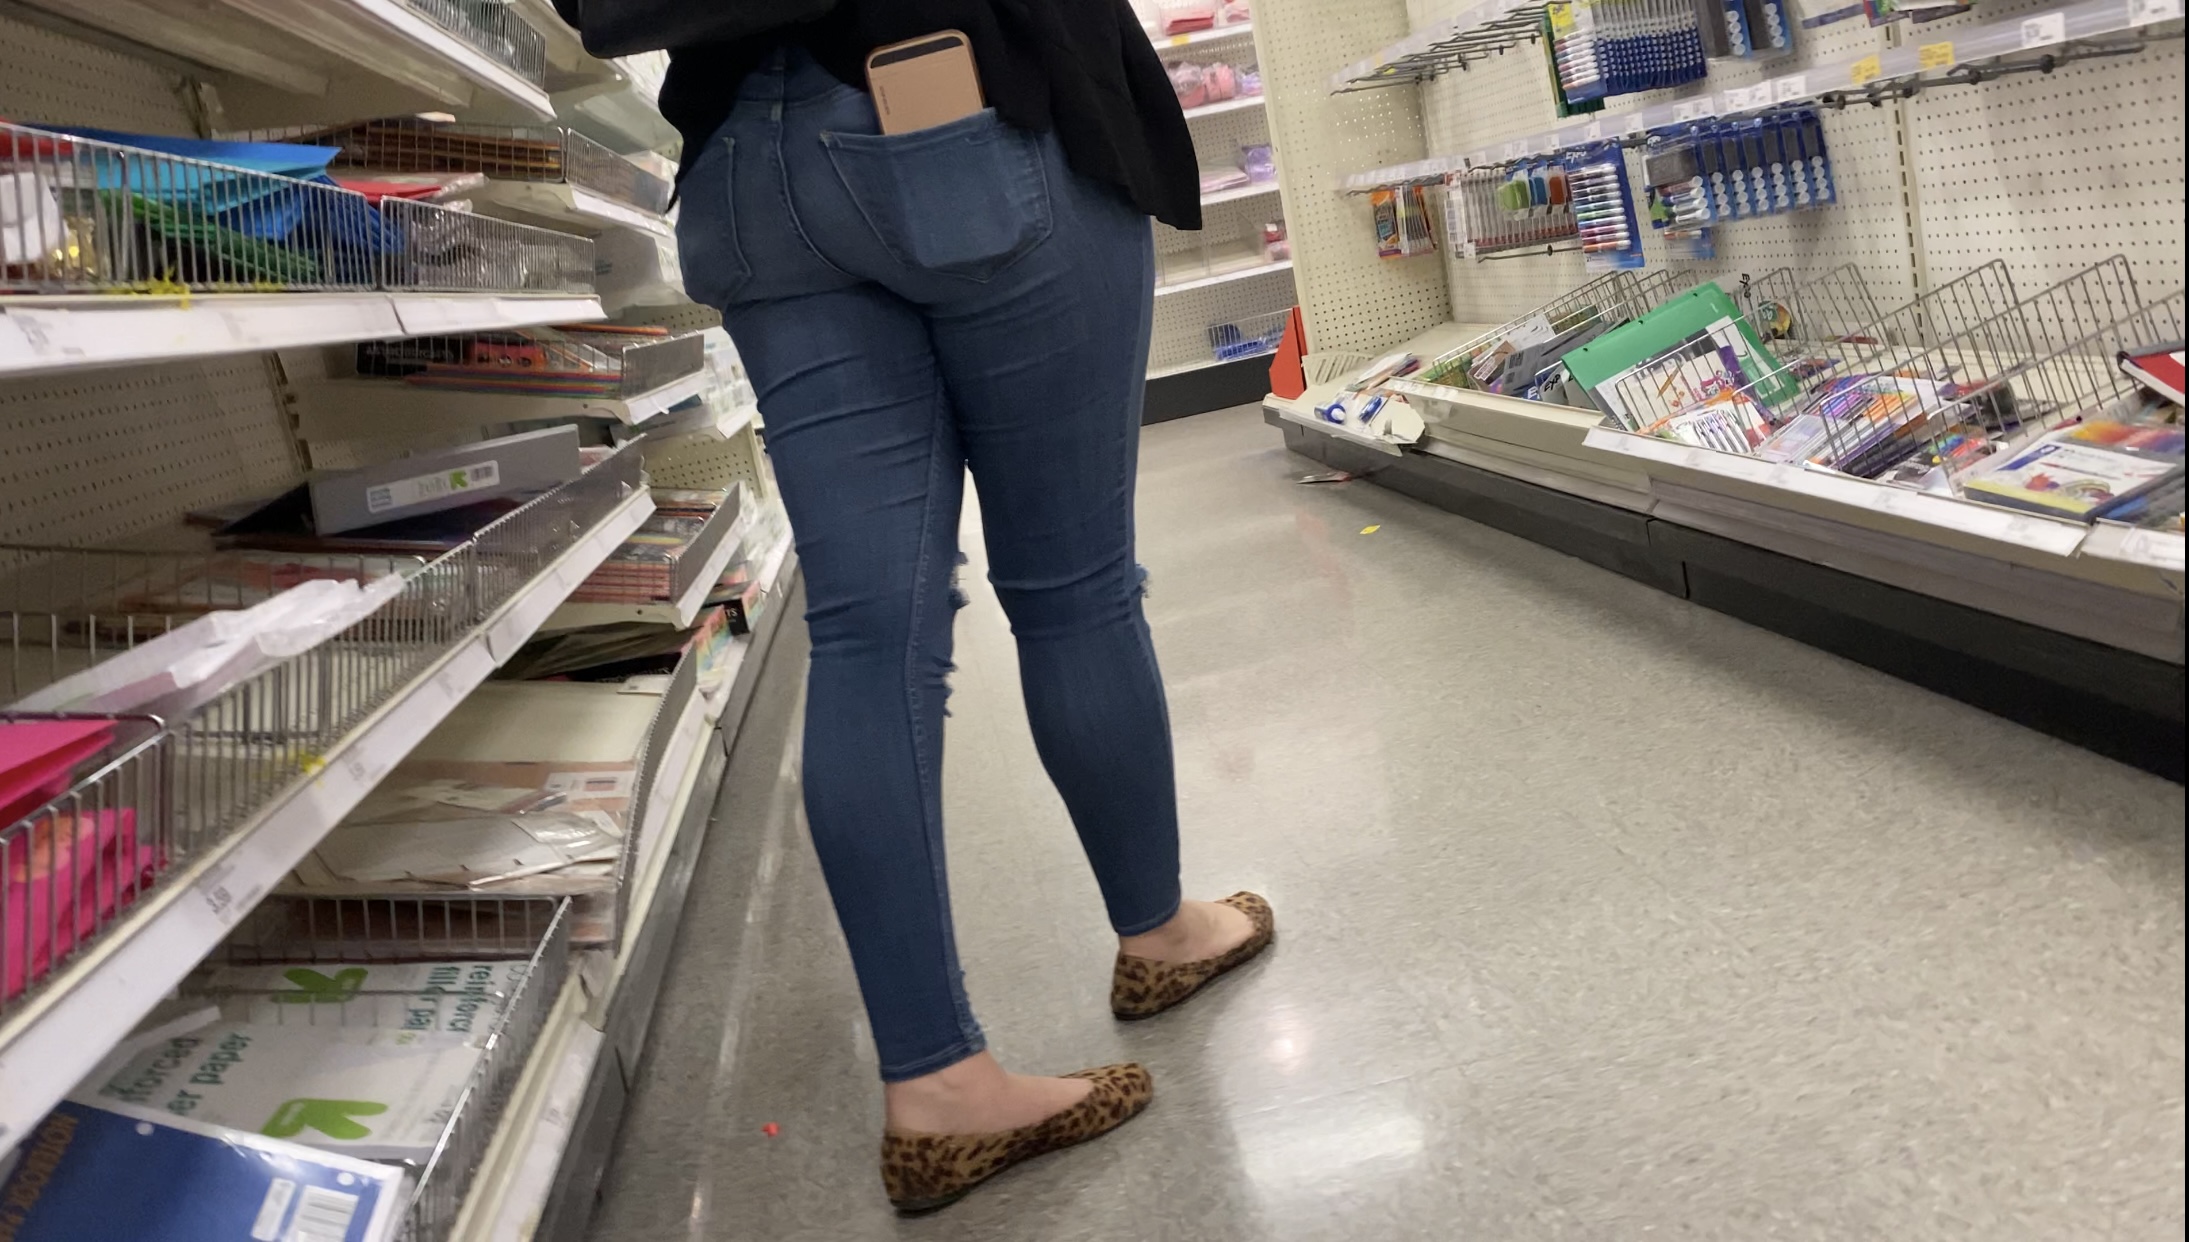 Thick women (she knew and liked it) - Tight Jeans - Forum